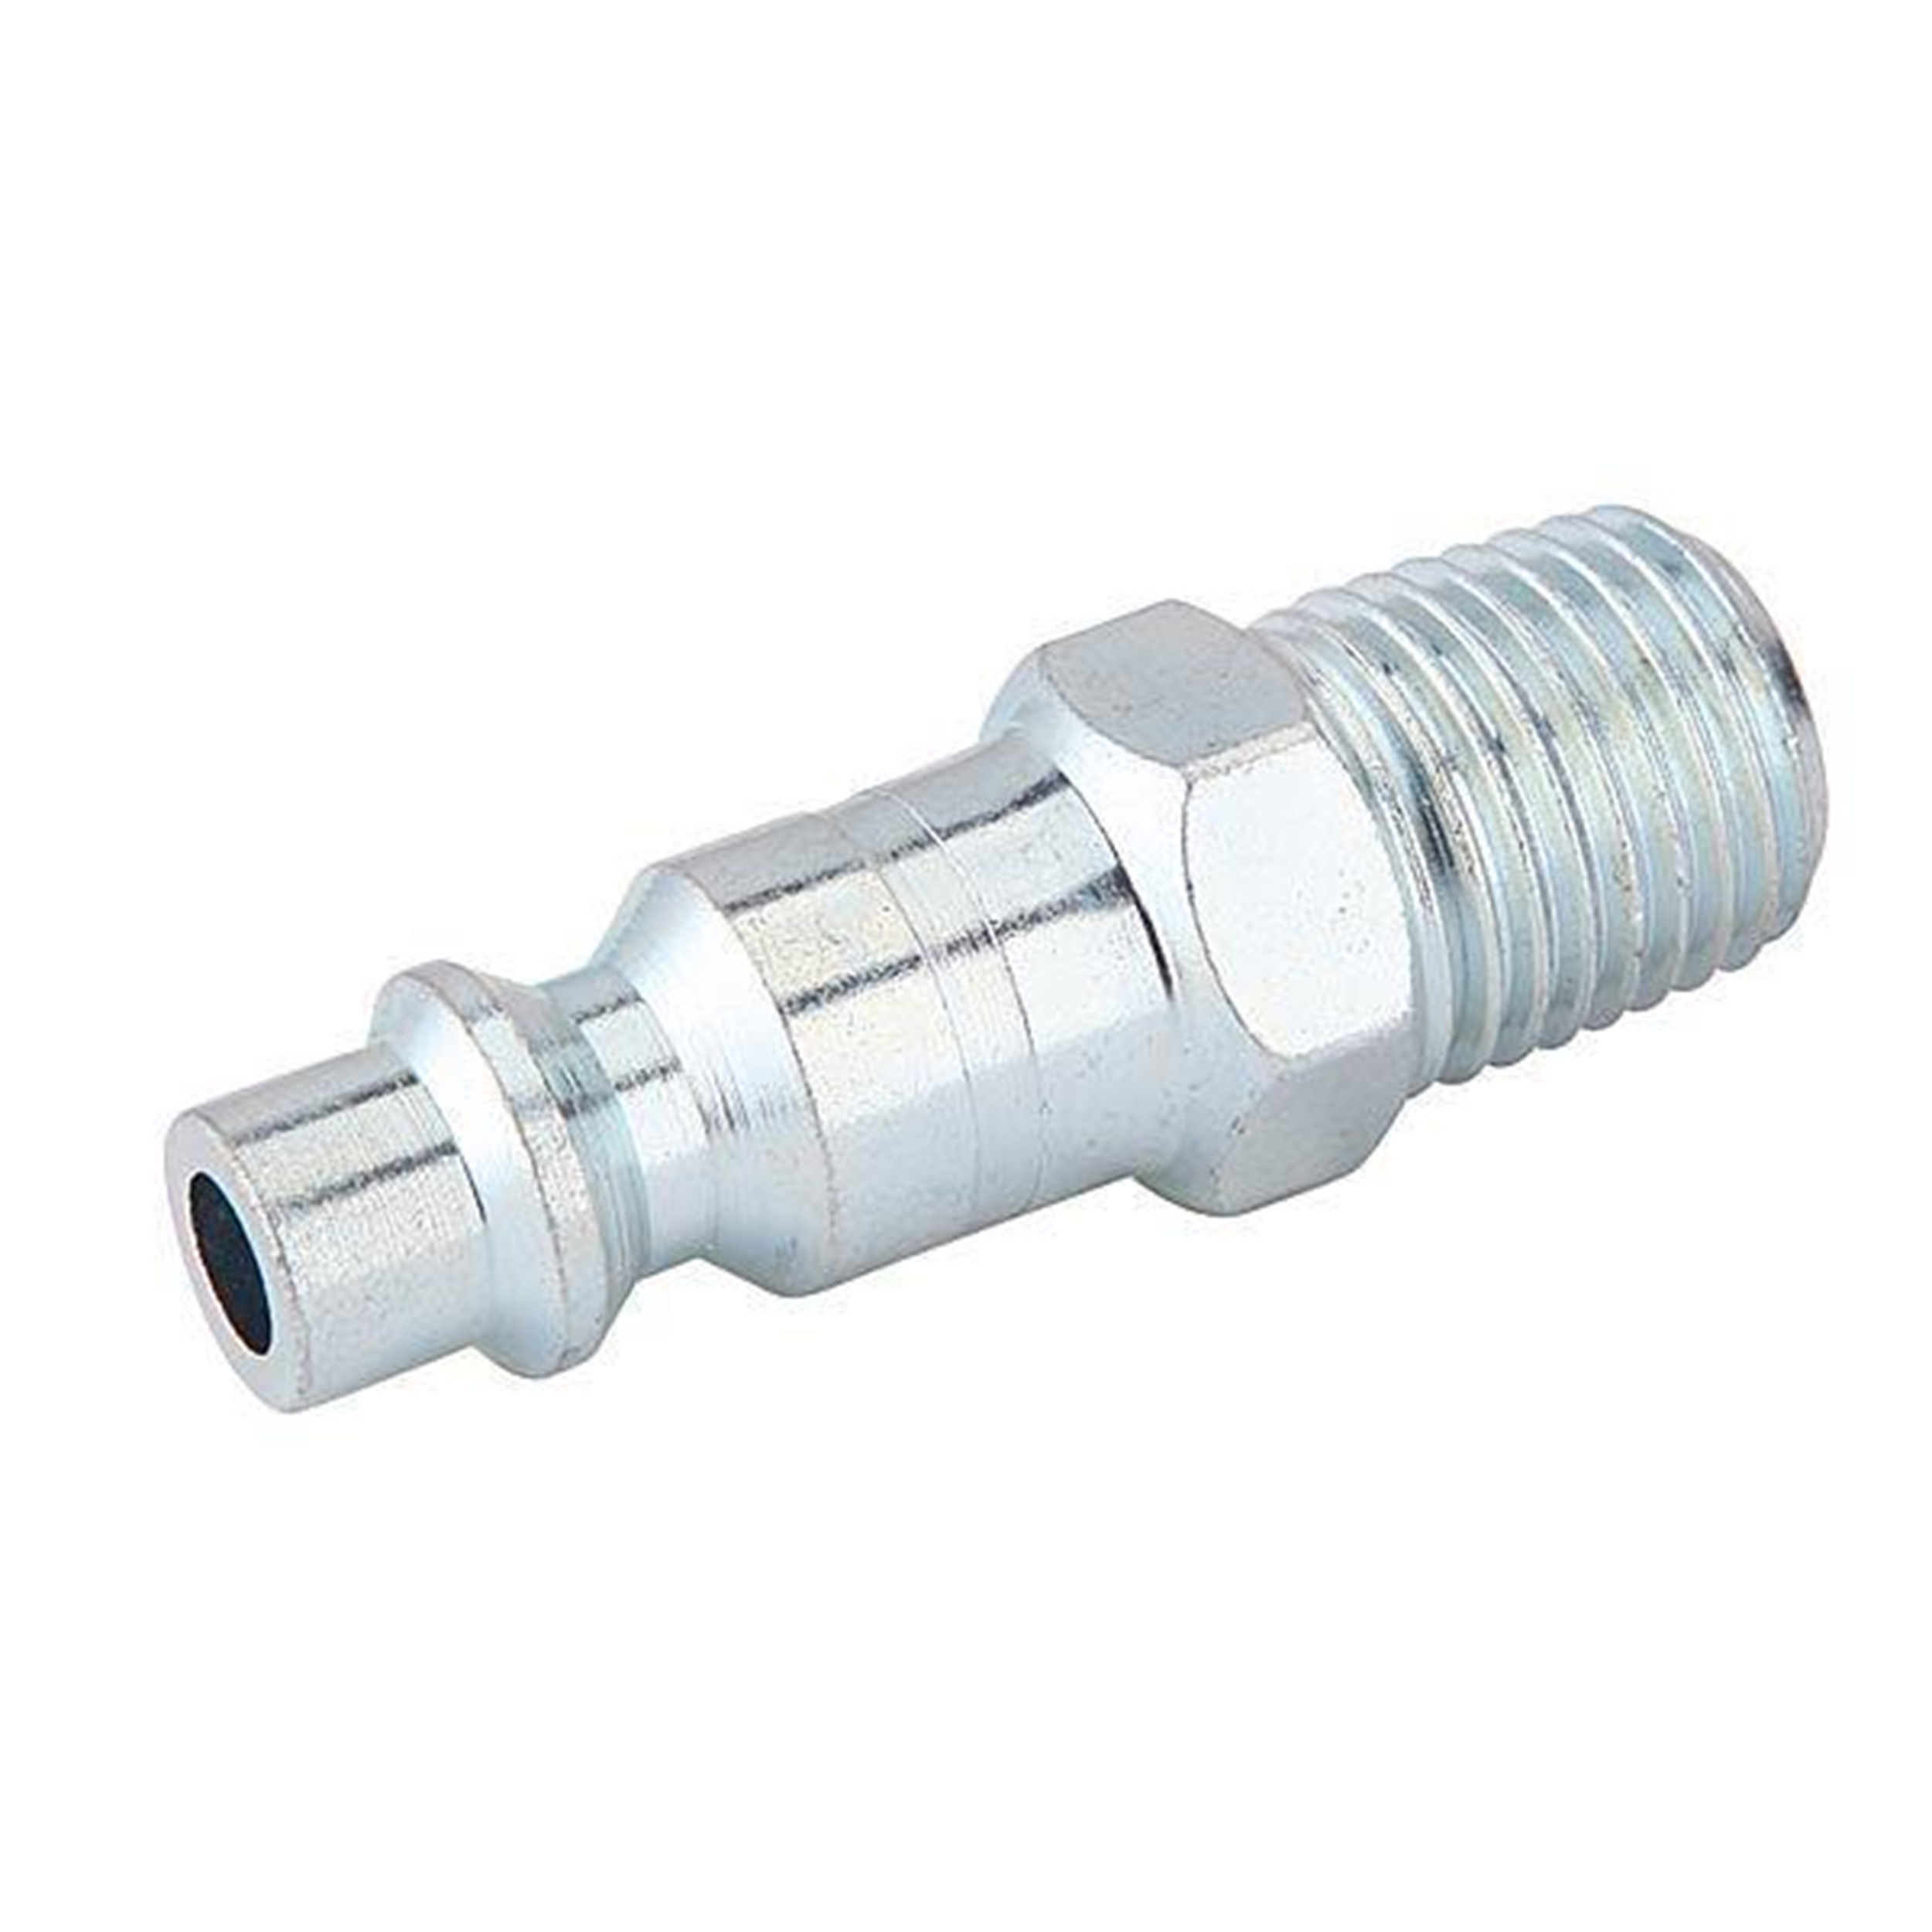 1/4-inch Industrial Air Plug With Male 1/4-inch Npt